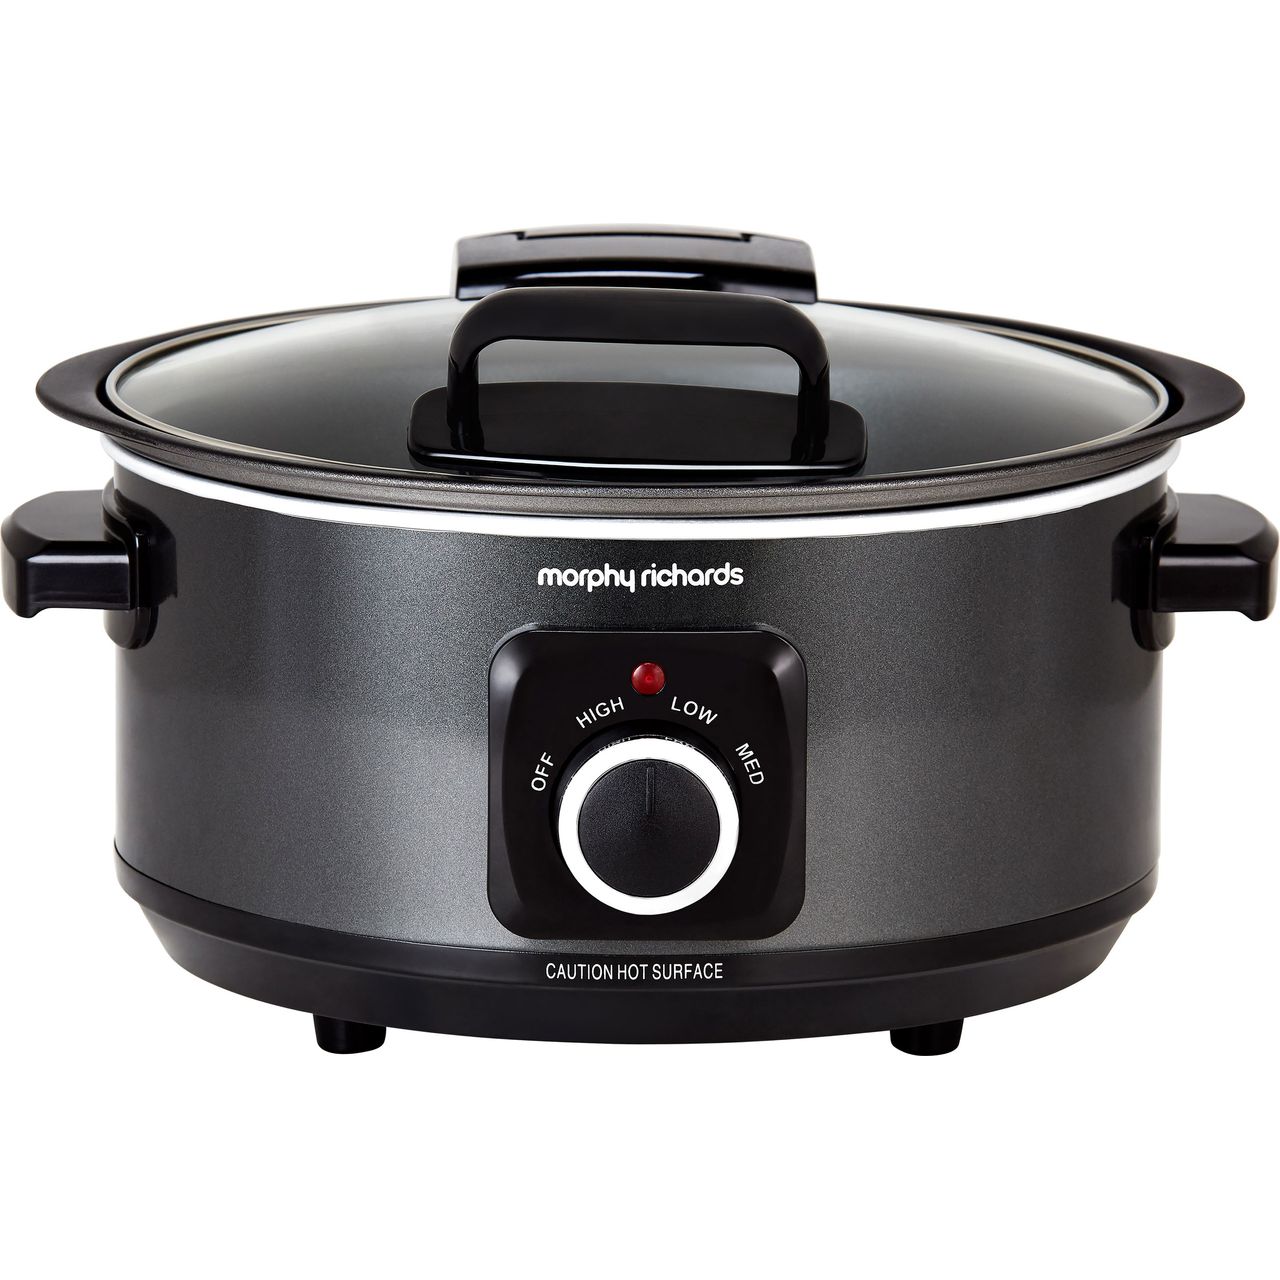 Morphy Richards 460020 3.5 Litre Slow Cooker Review